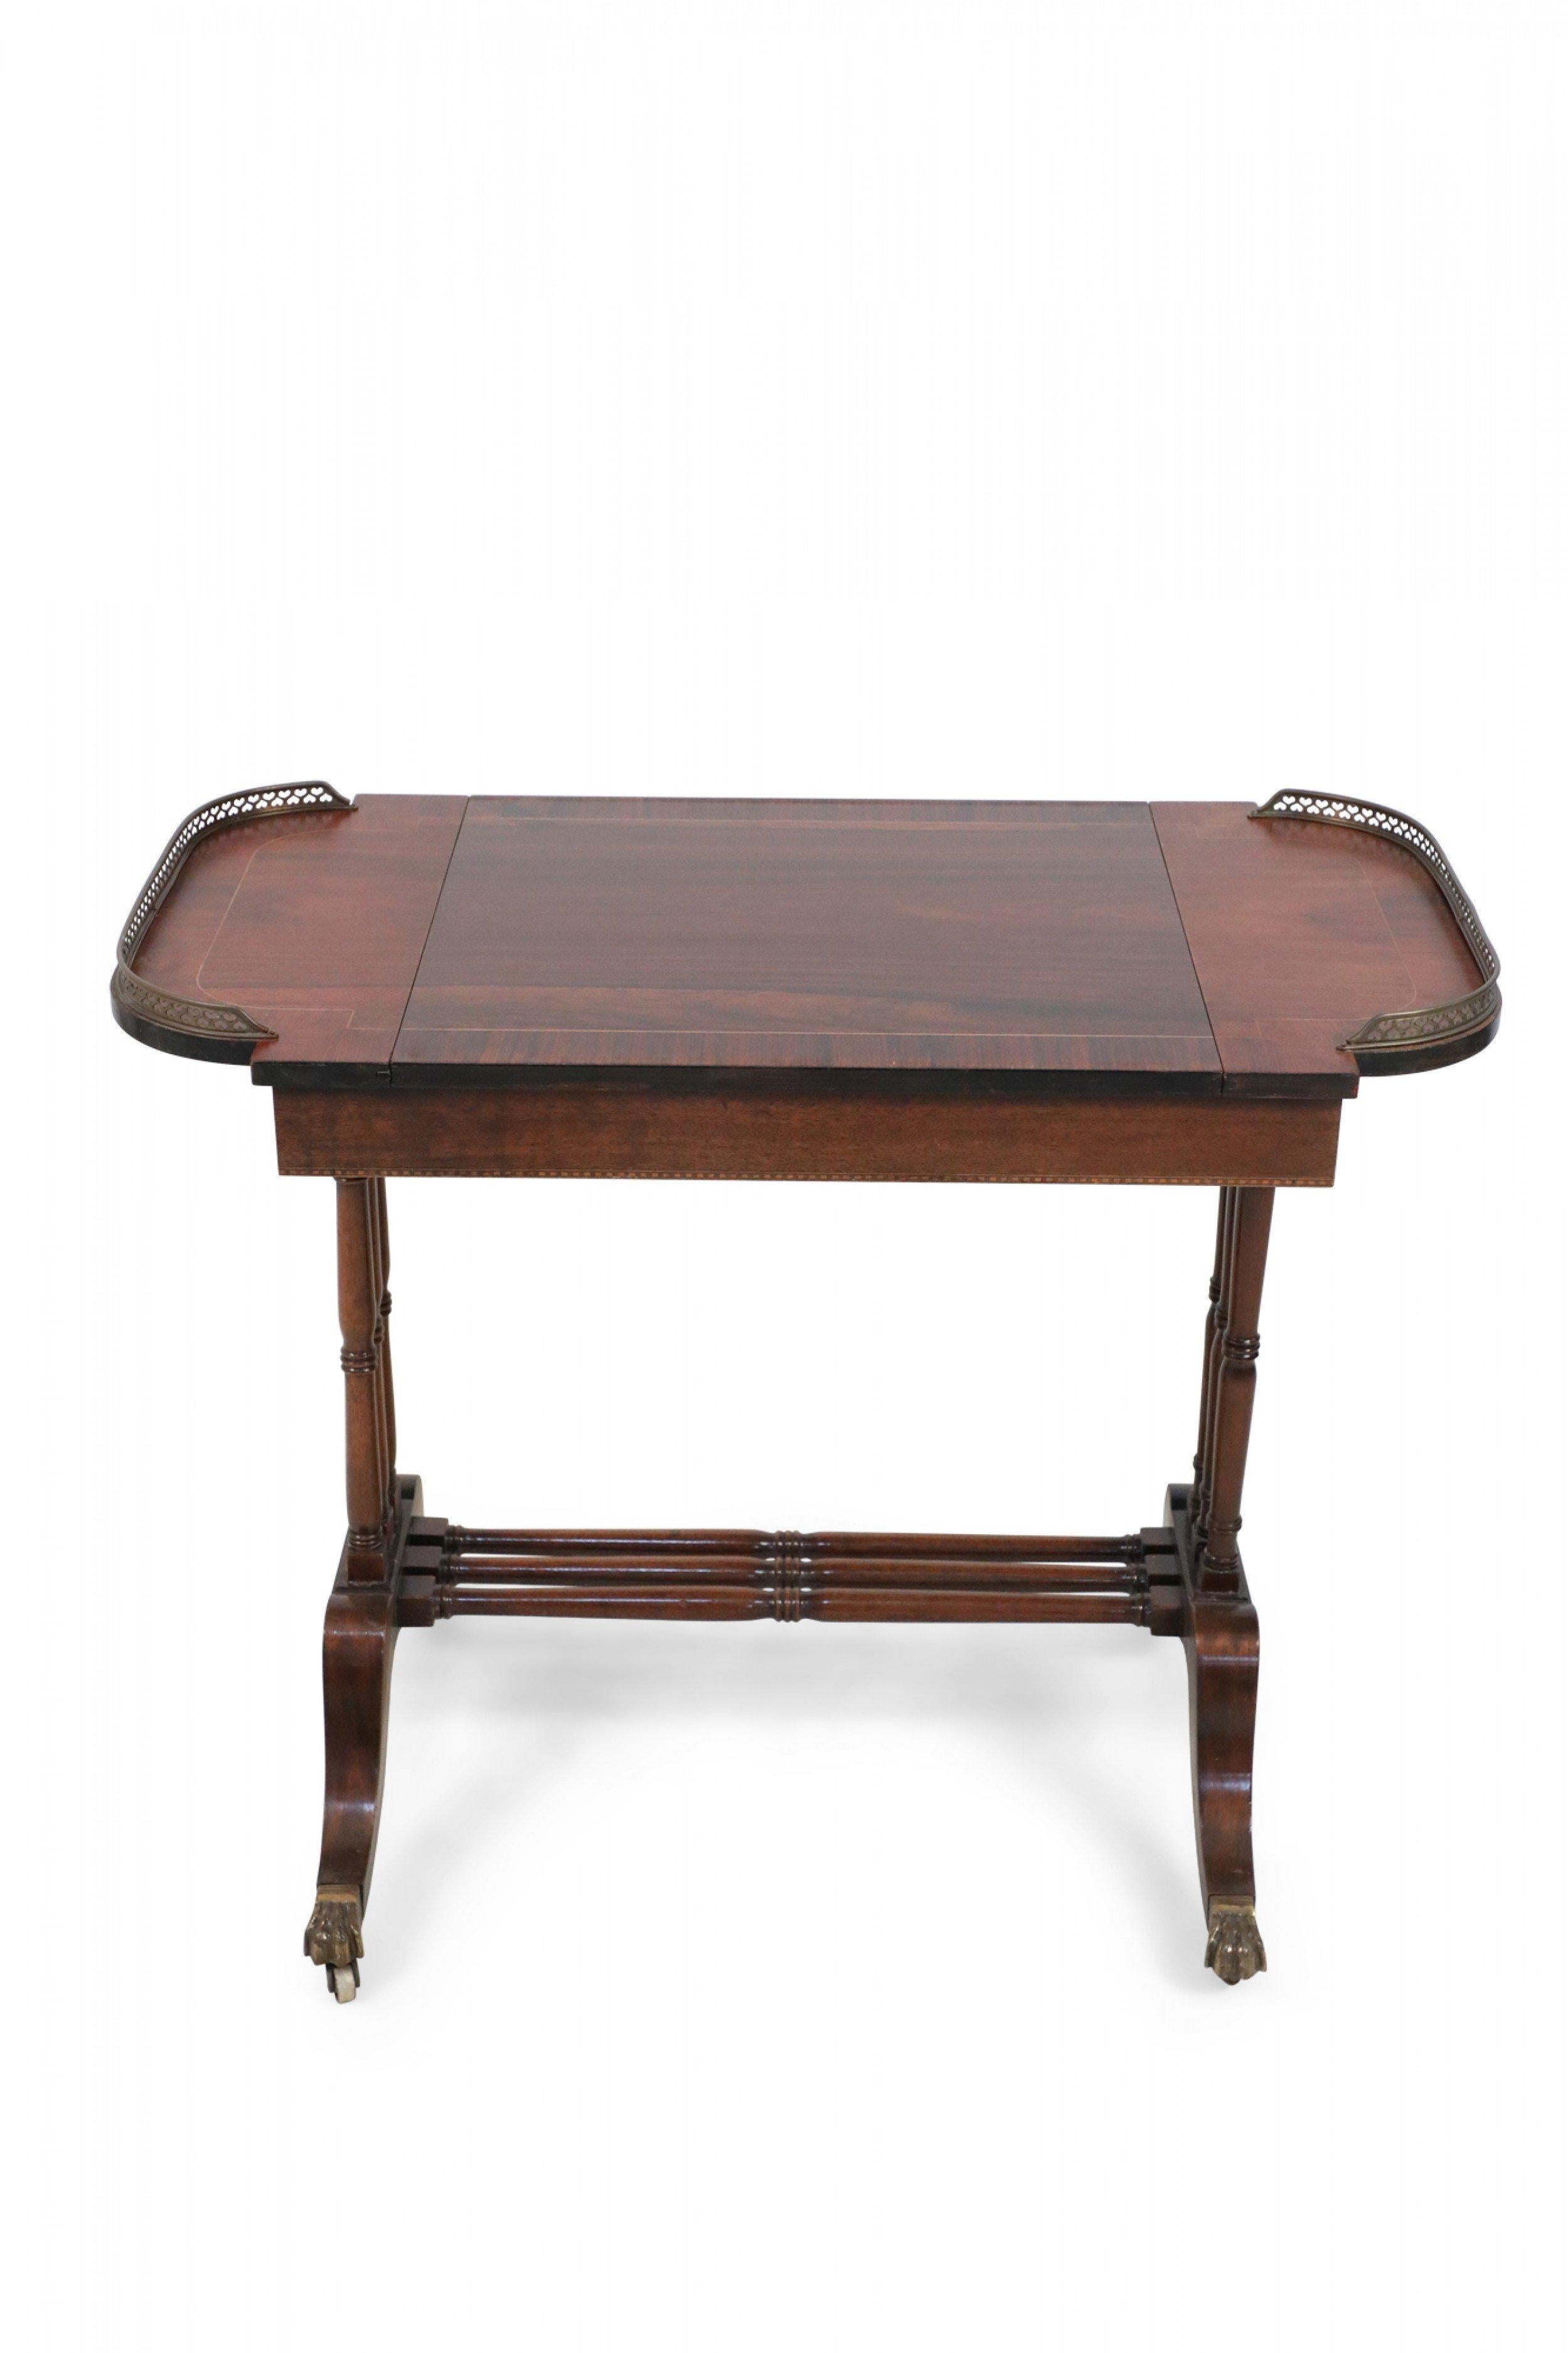 English Regency Style Wooden Game Table For Sale 3